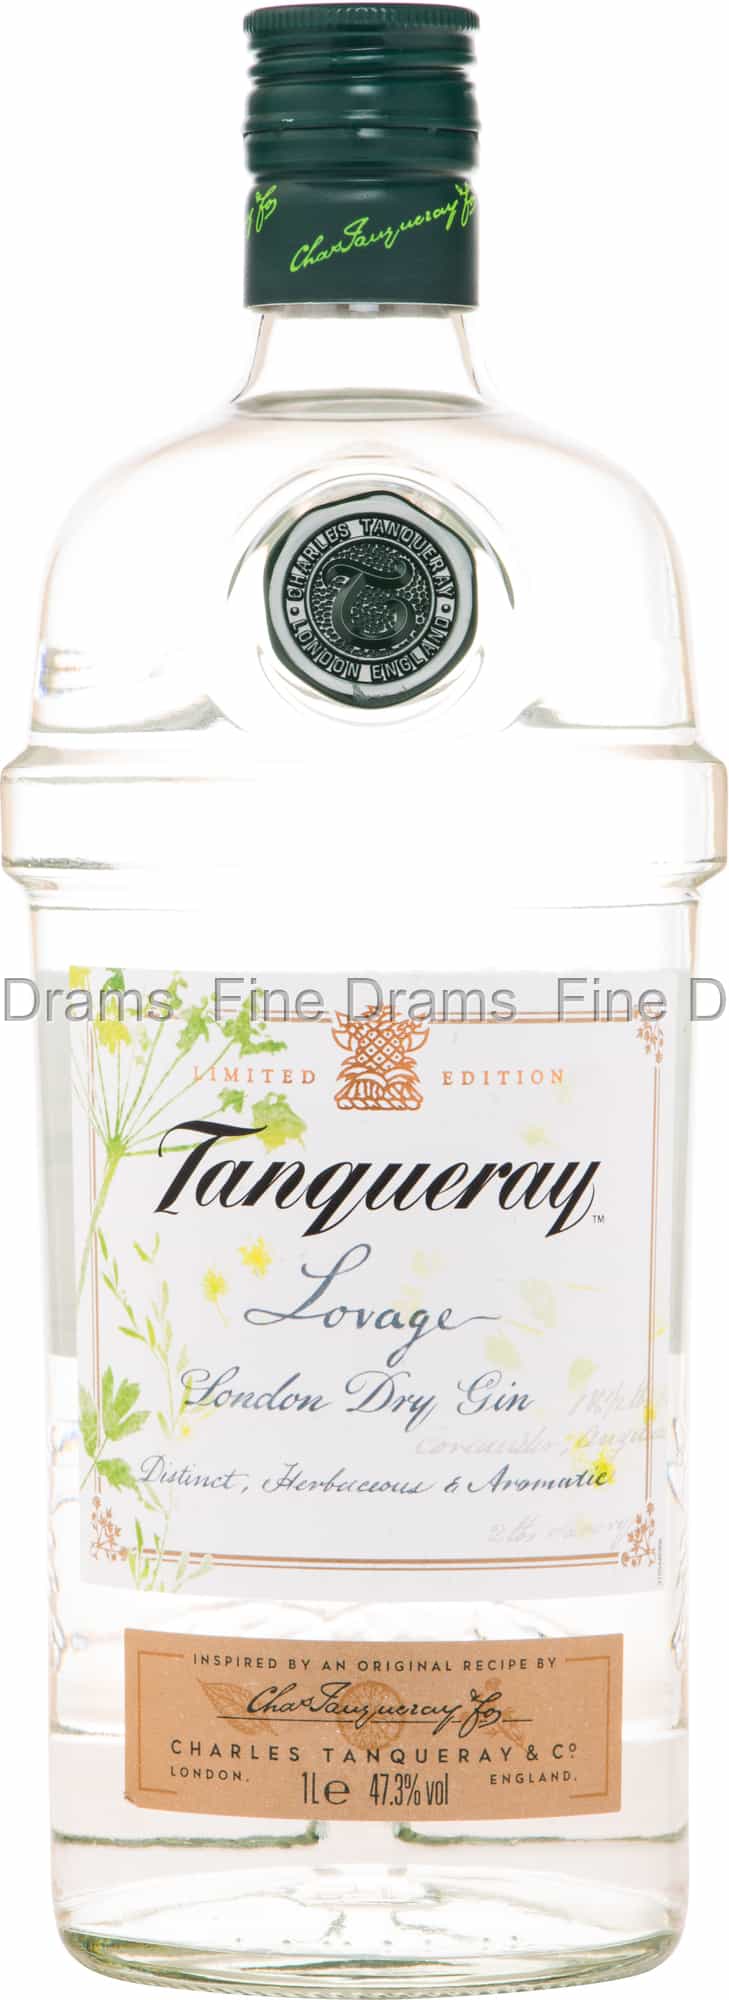 Tanqueray Gin (1 Liter) Lovage